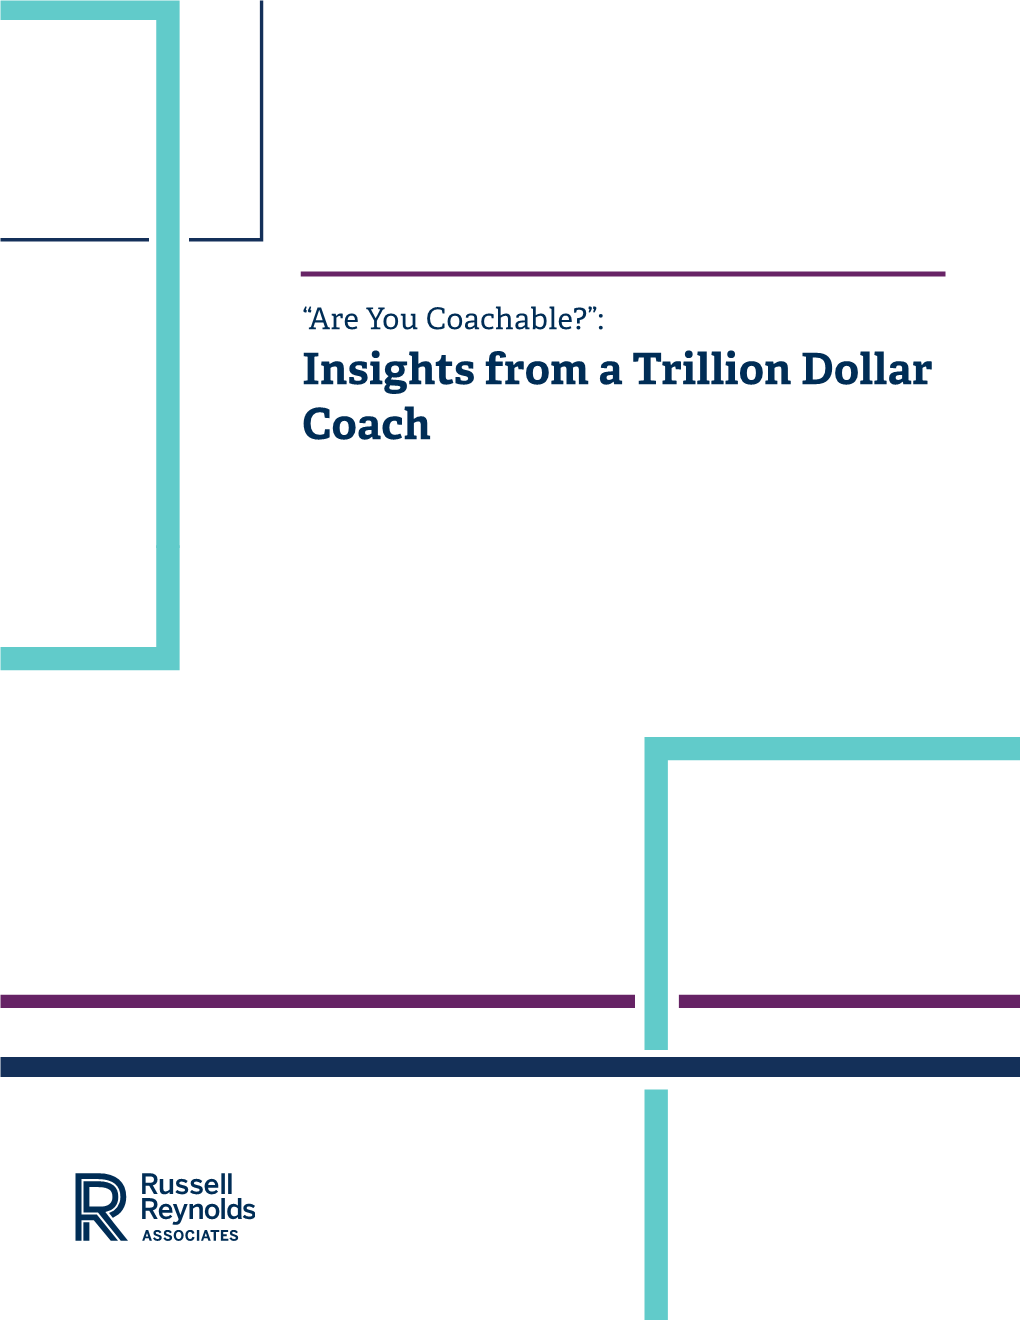 Insights from a Trillion Dollar Coach 2